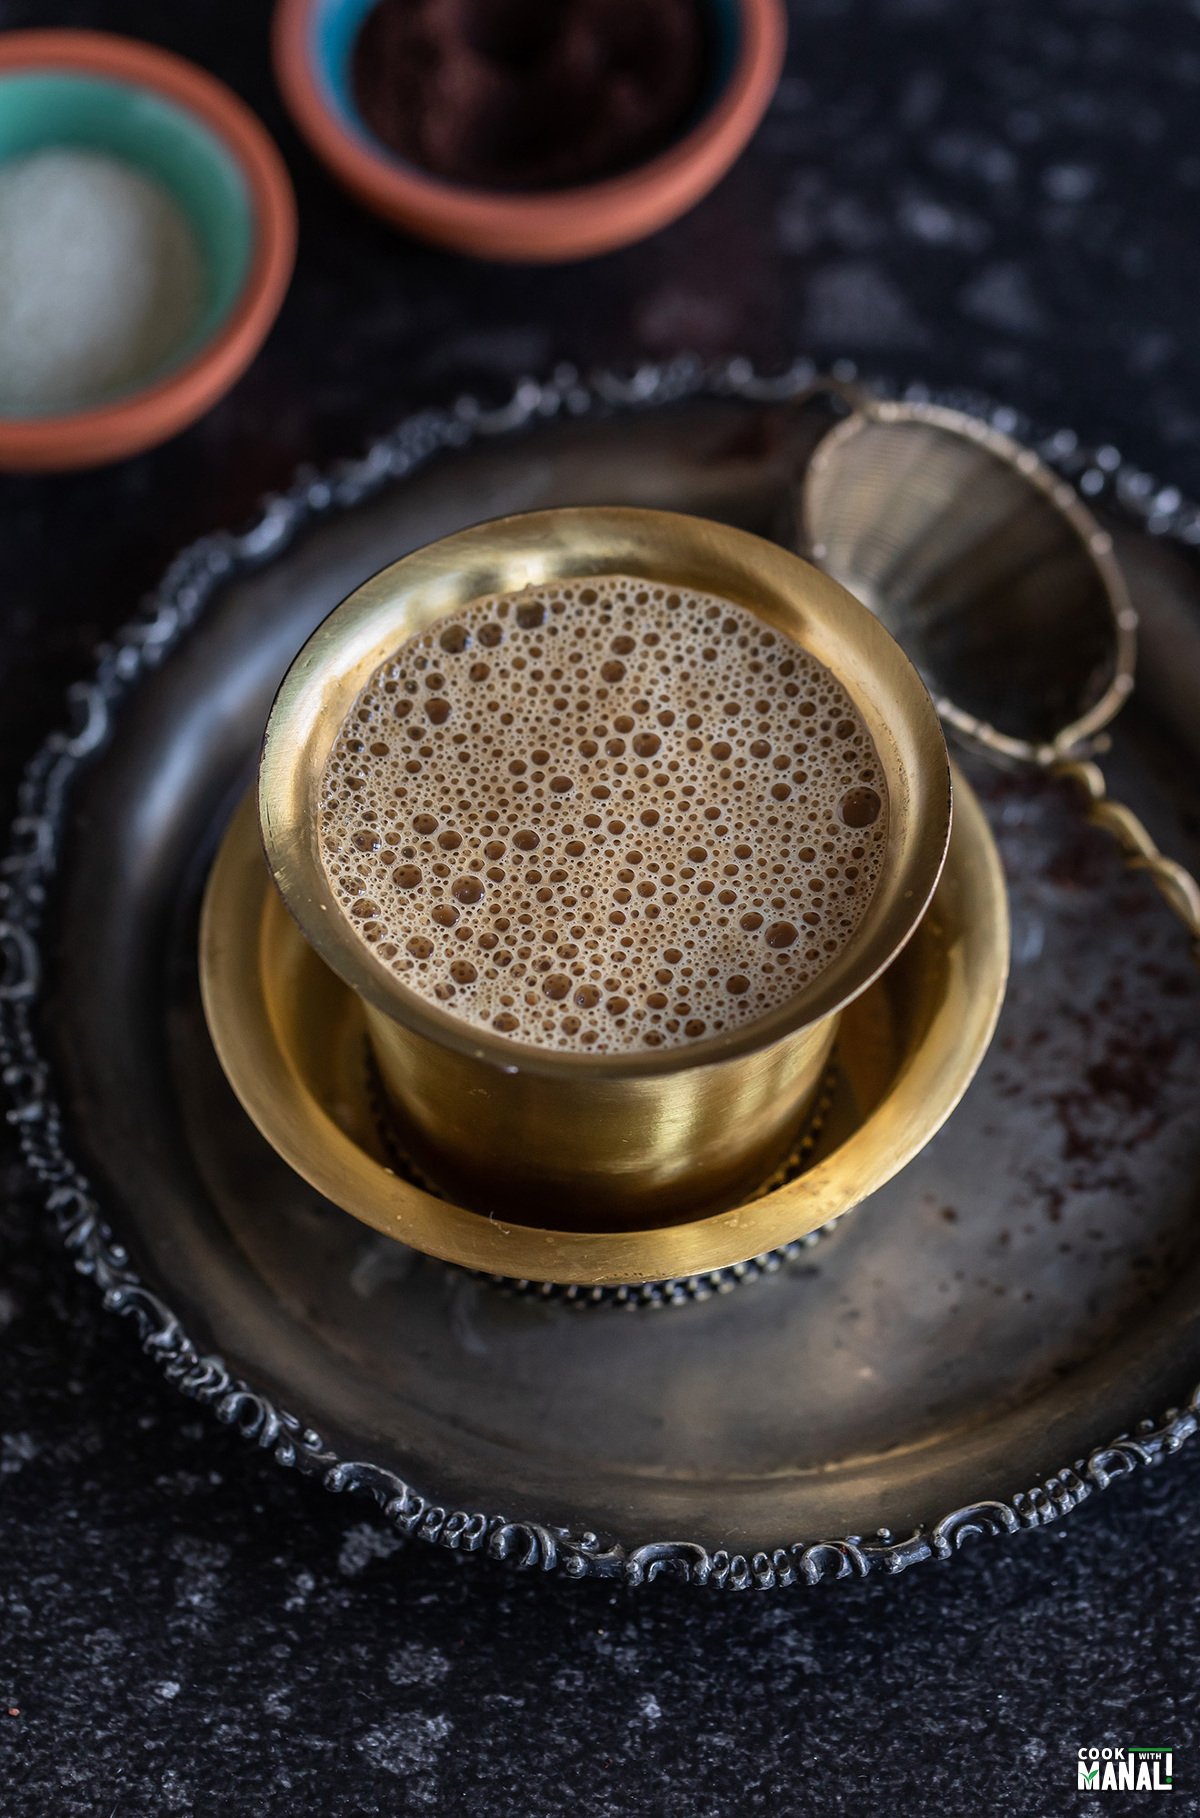 https://www.cookwithmanali.com/wp-content/uploads/2022/03/South-Indian-Filter-Coffee.jpg